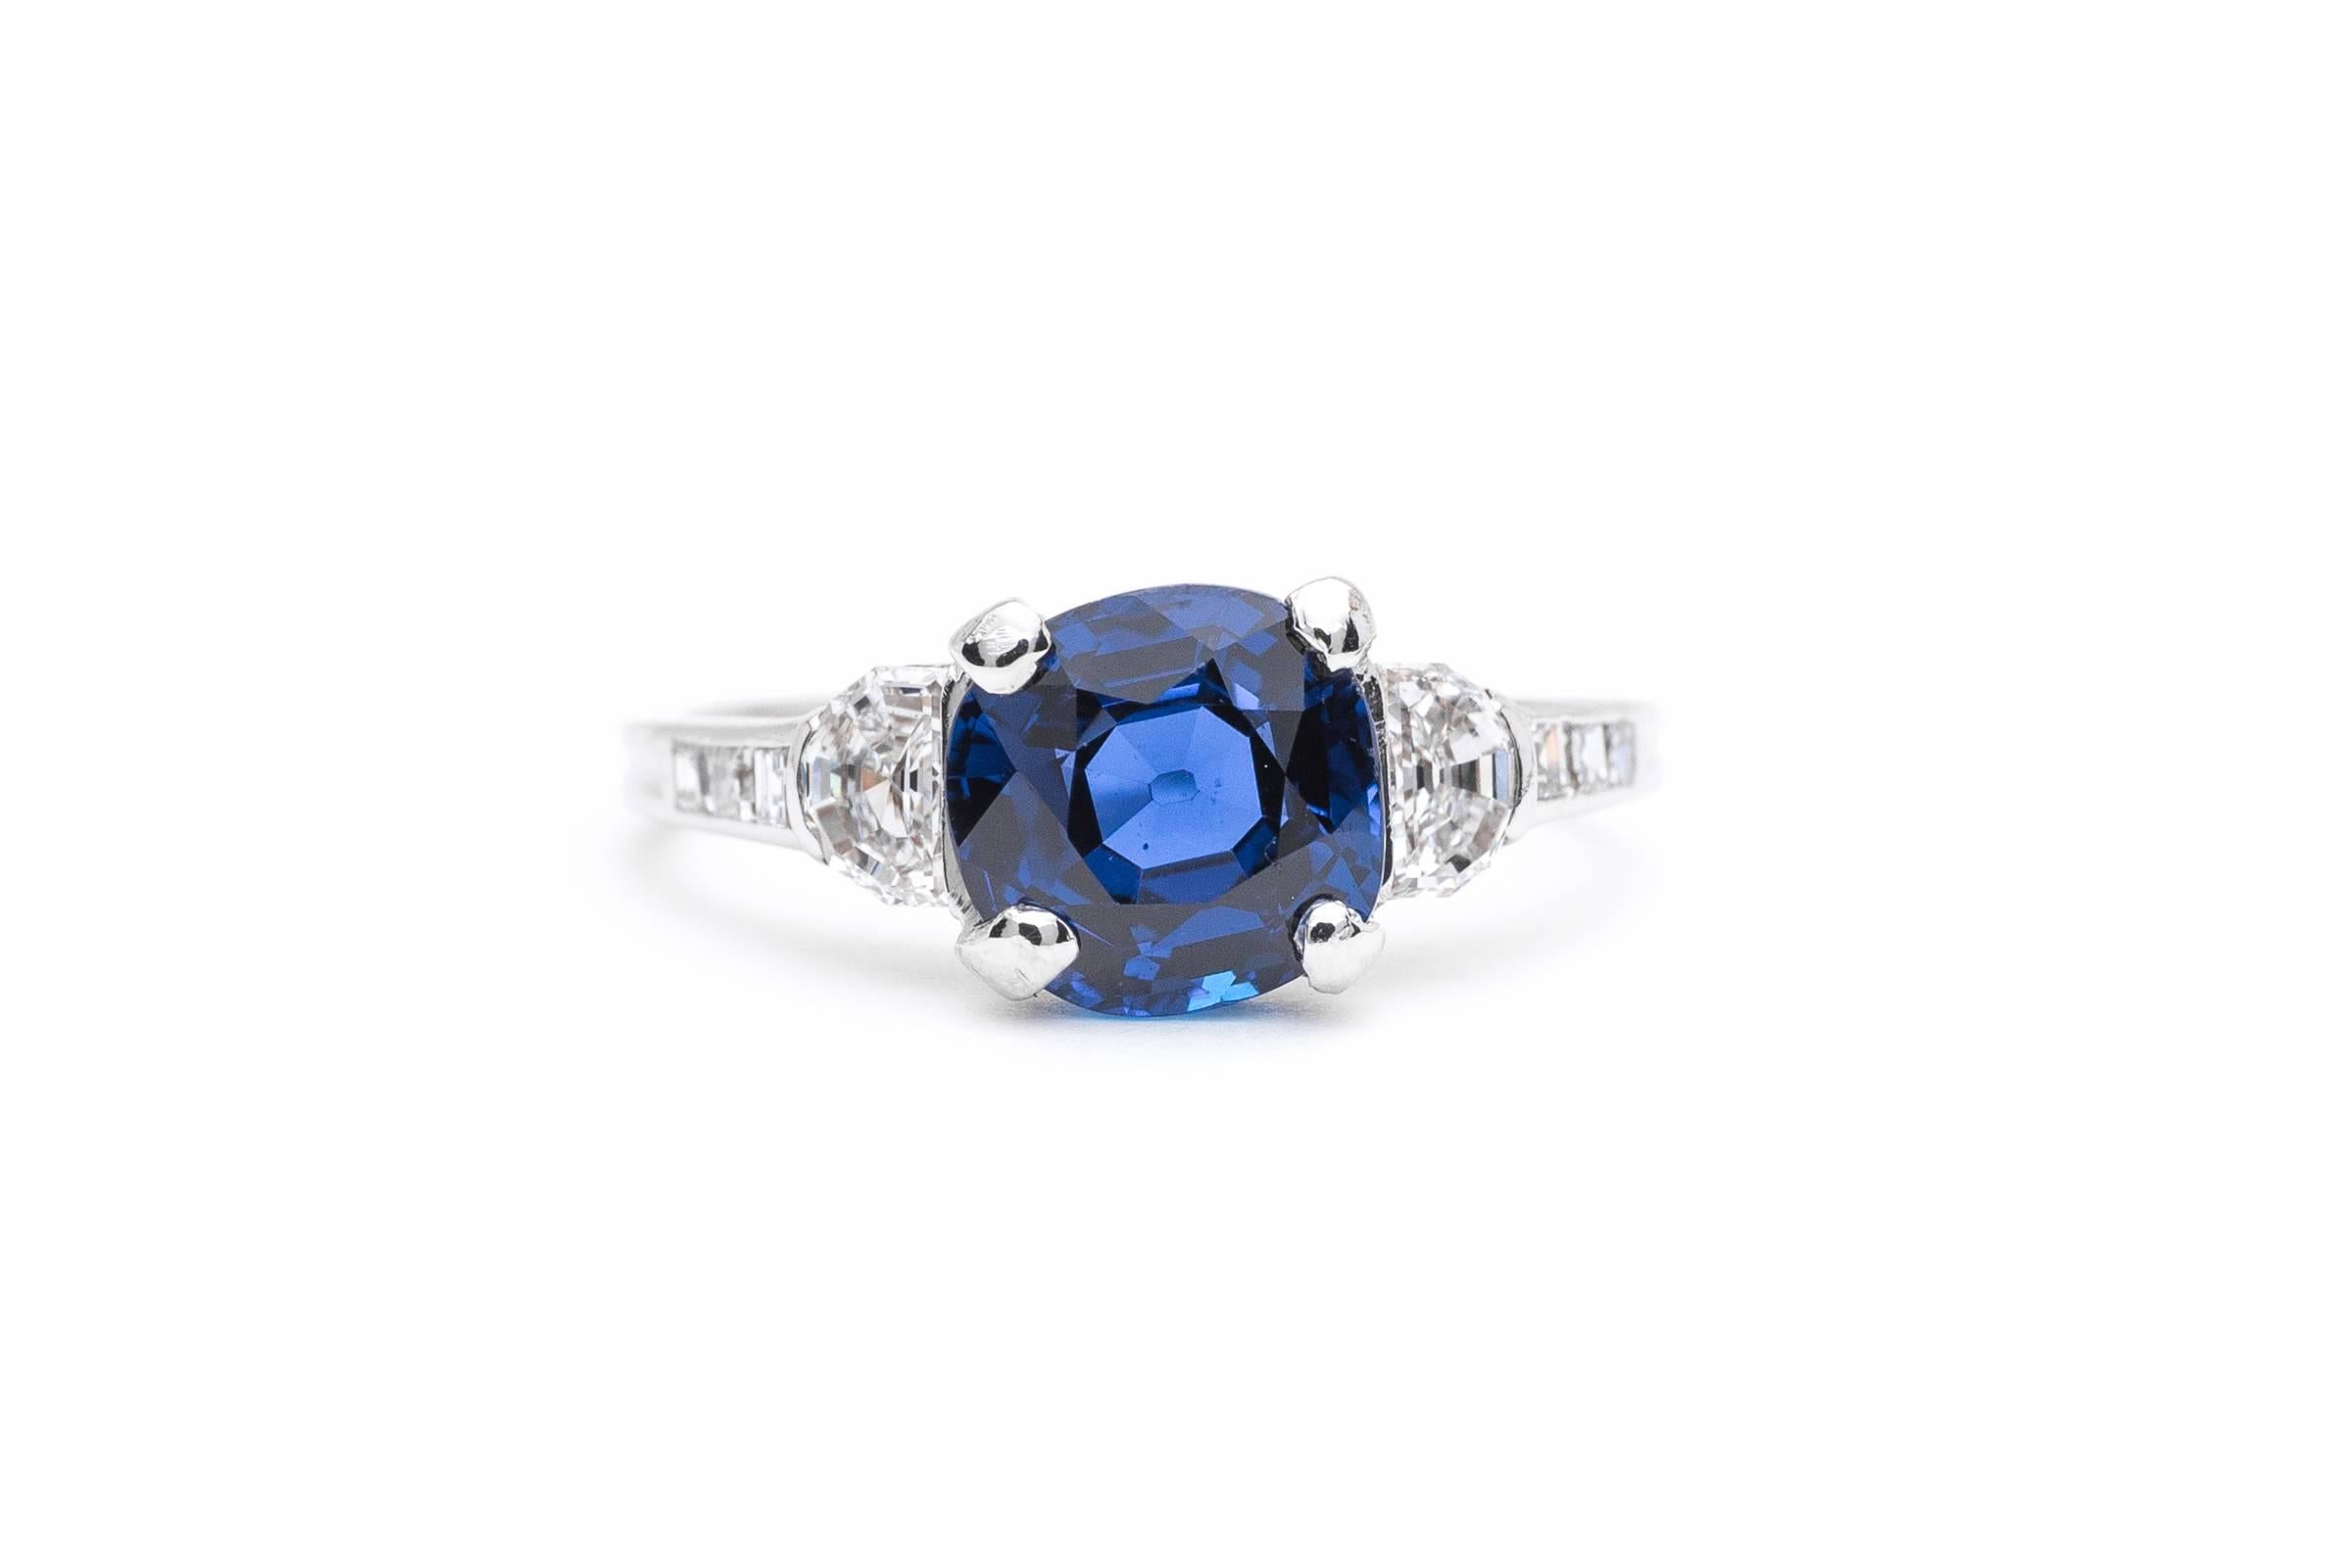 Beacon Hill Jewelers Presents:

A stunning art deco period sapphire and diamond engagement ring by Tiffany & Company. Centered by a gorgeous 2.23 carat cushion shaped vivid blue sapphire of truly exceptional quality, this ring features half